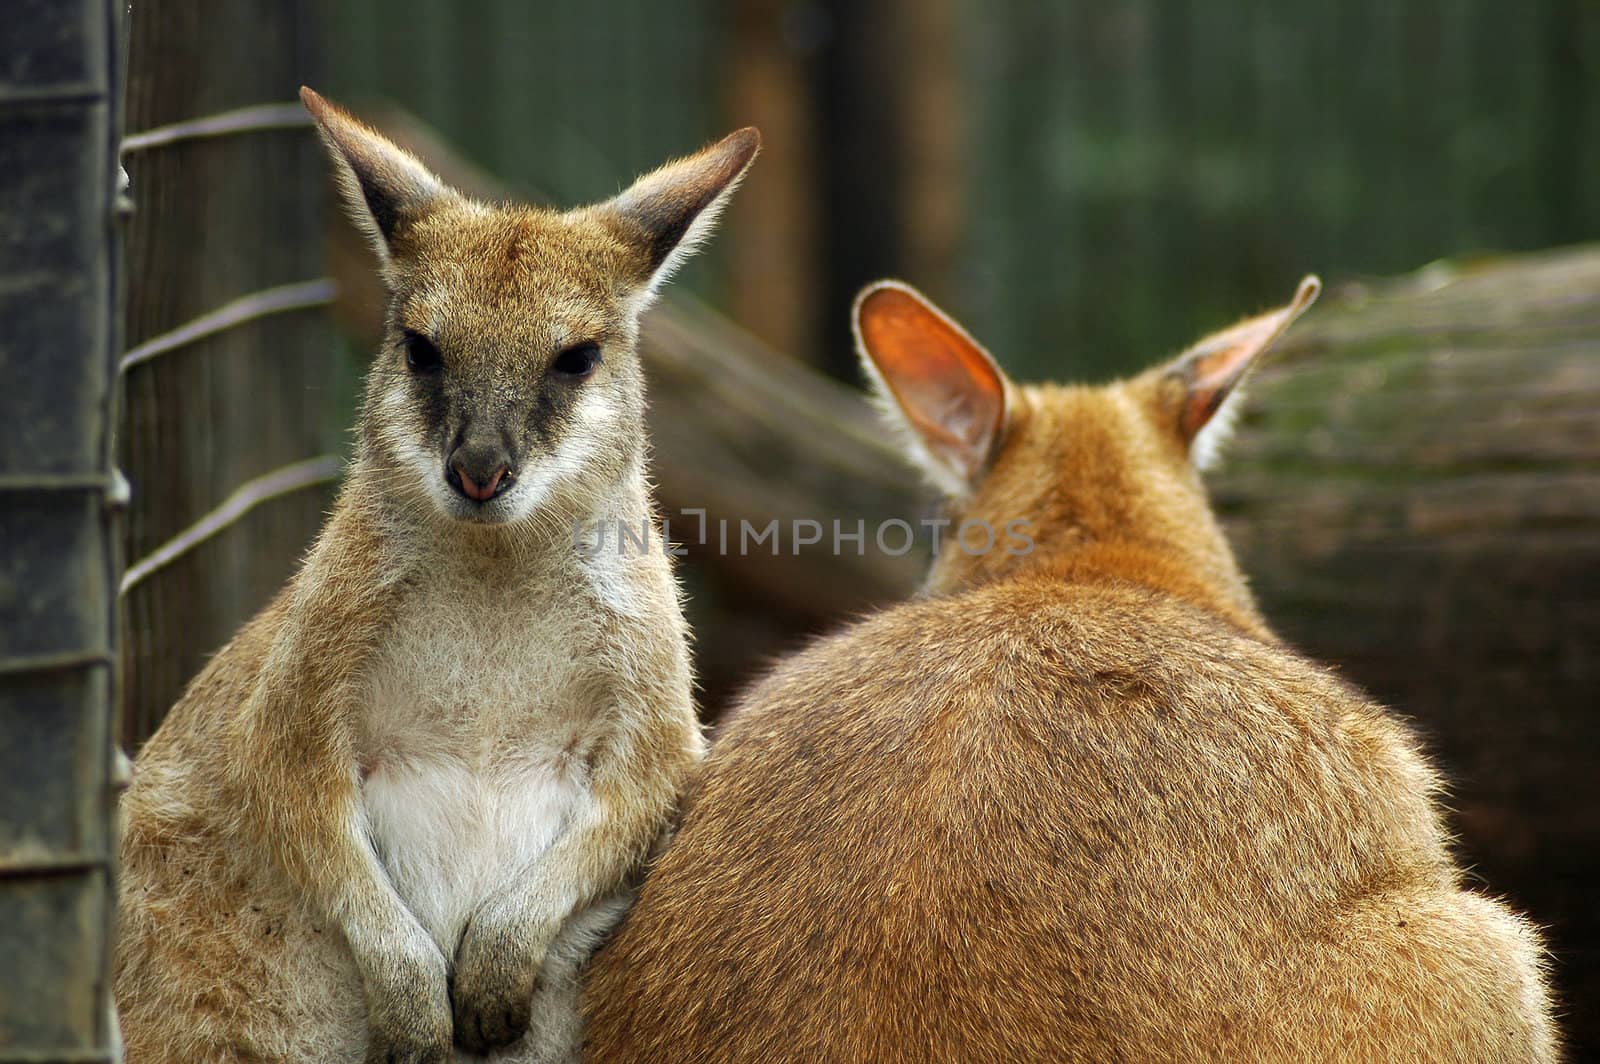 two brown kangaroos in zoo, fence visible